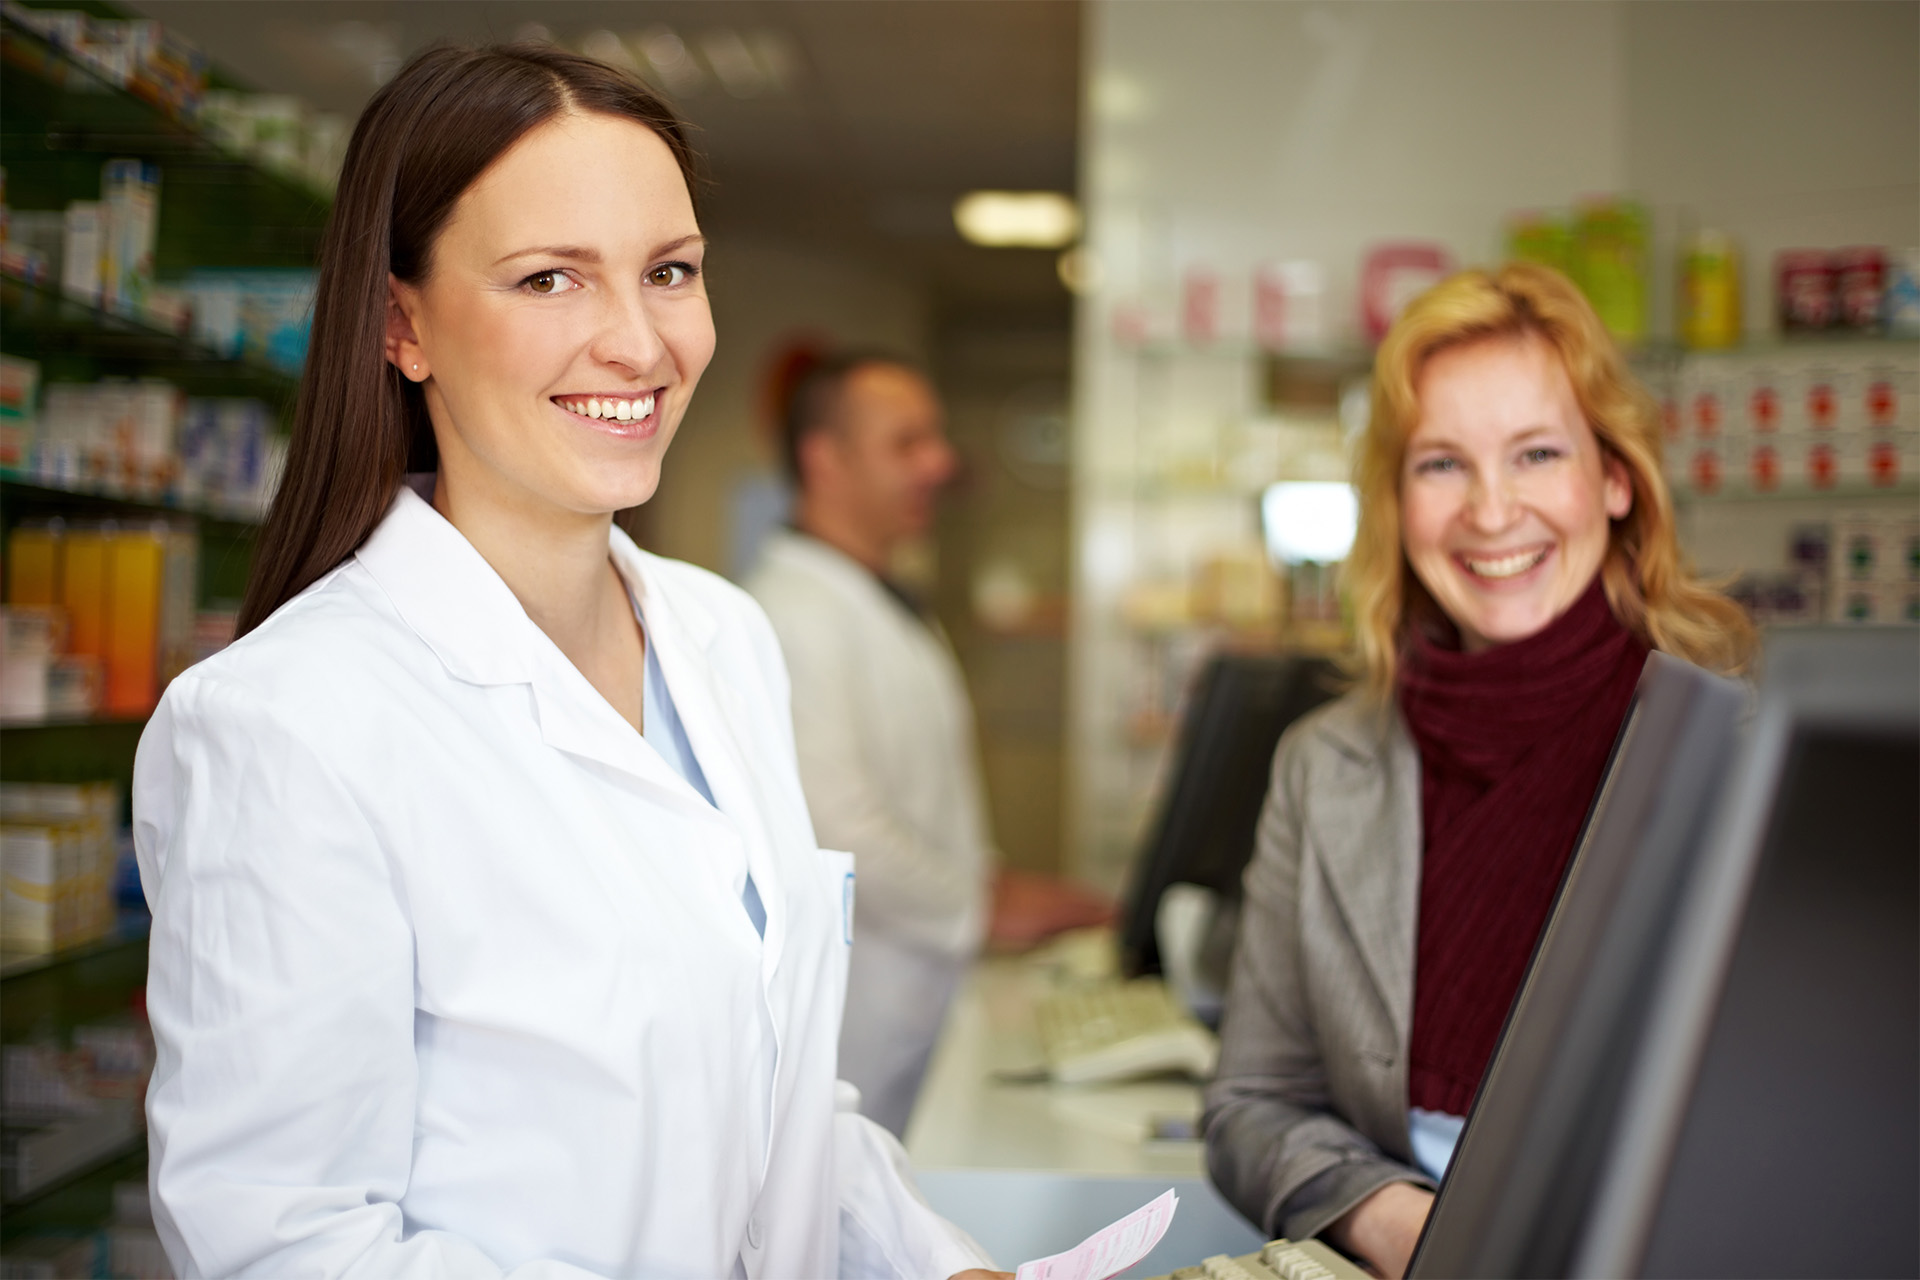 A female pharmacist and a female patient smile while standing at the pharmacy counter